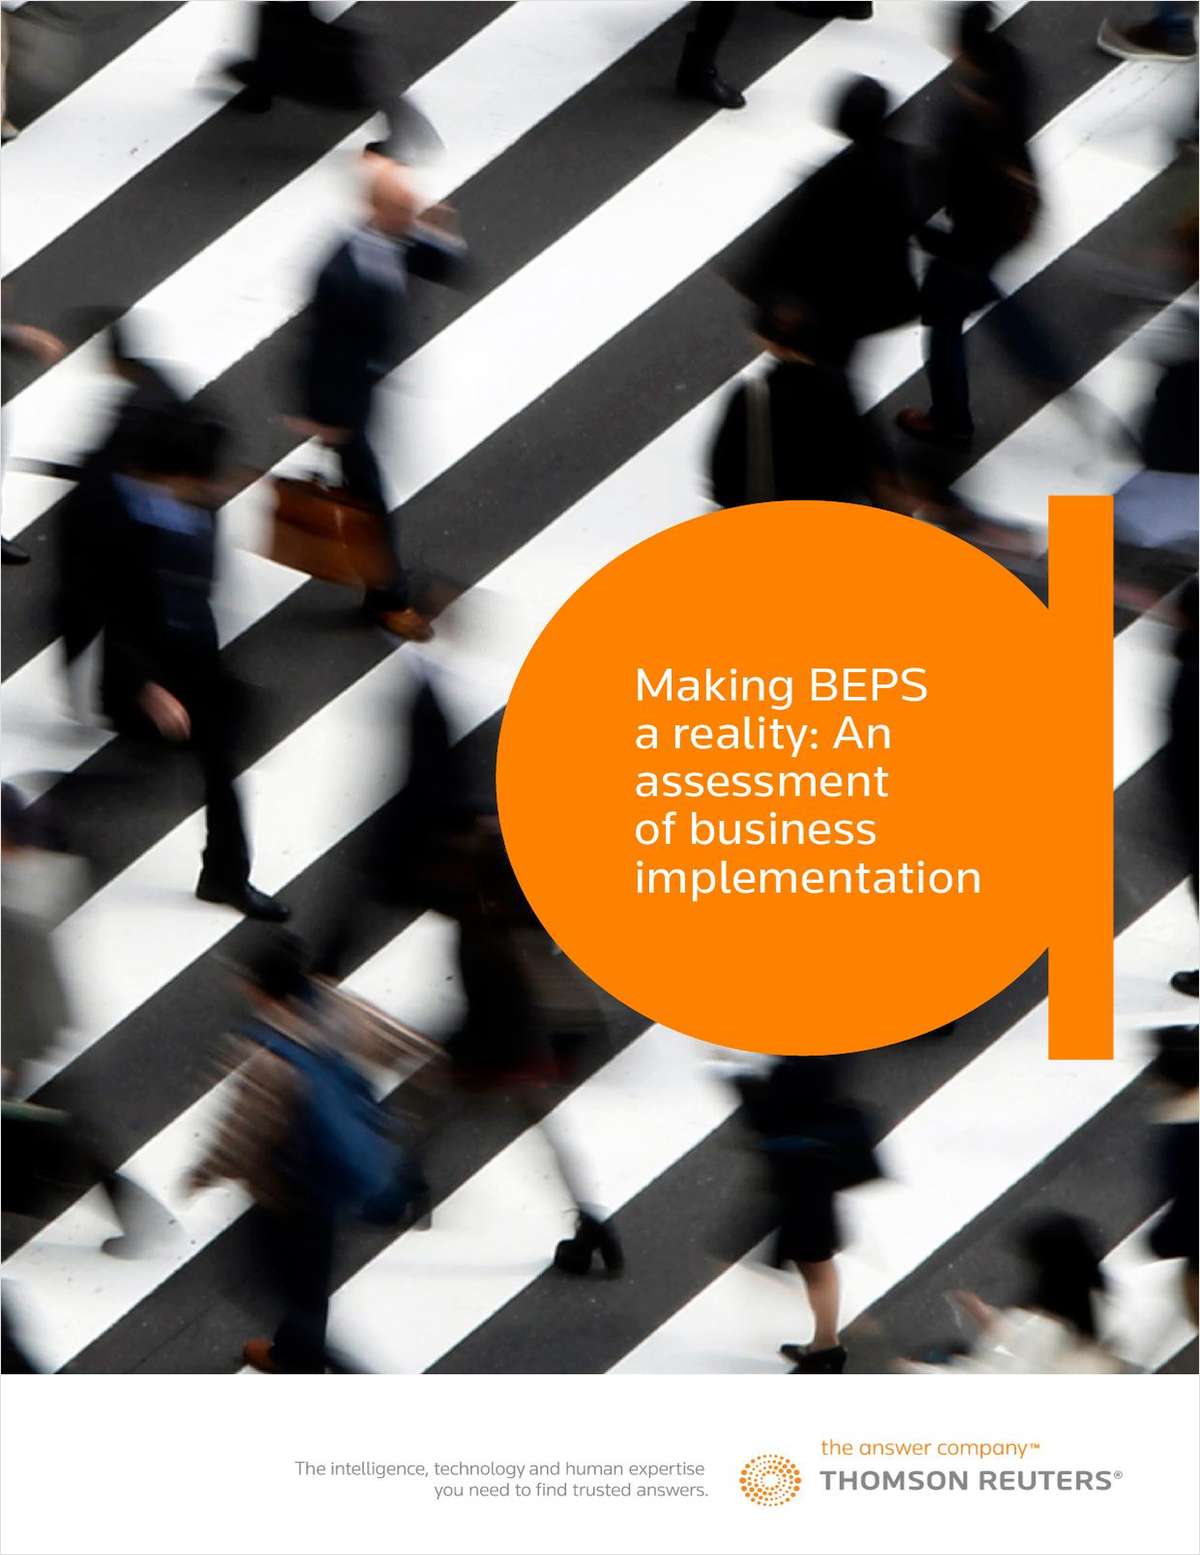 Making BEPS a reality: An assessment of business implementation